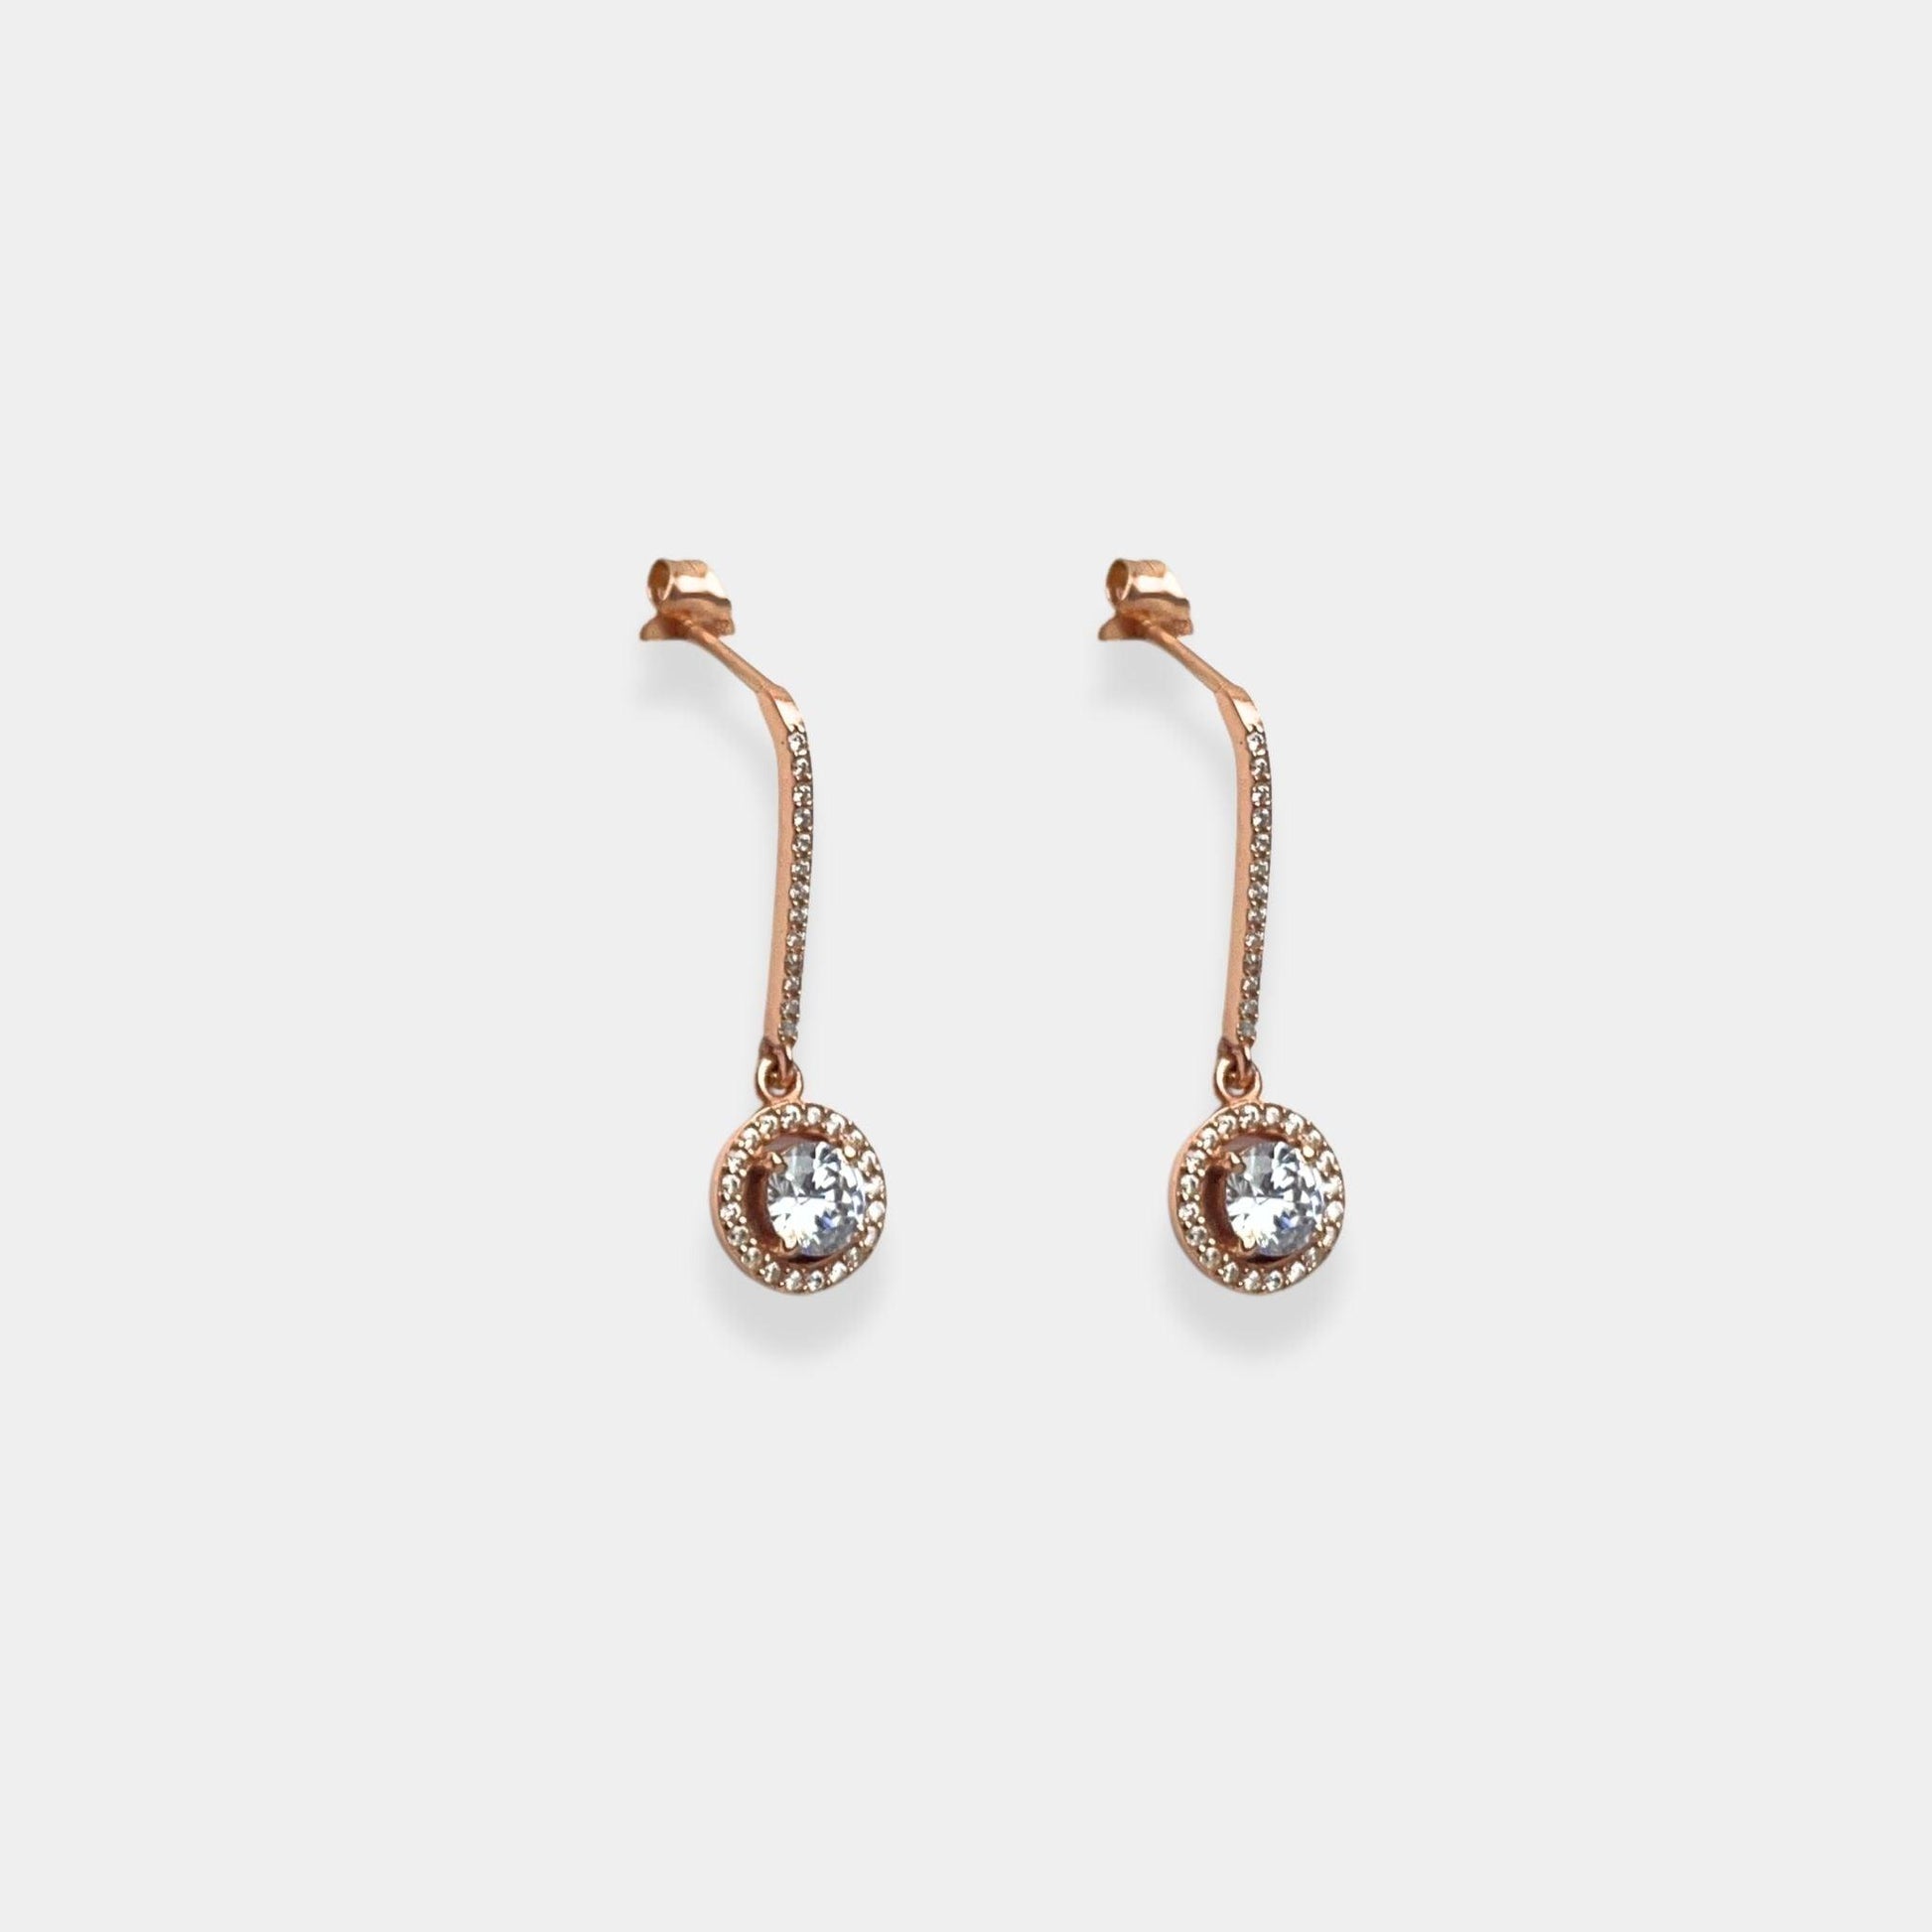 Rose gold earrings, crafted from sterling silver